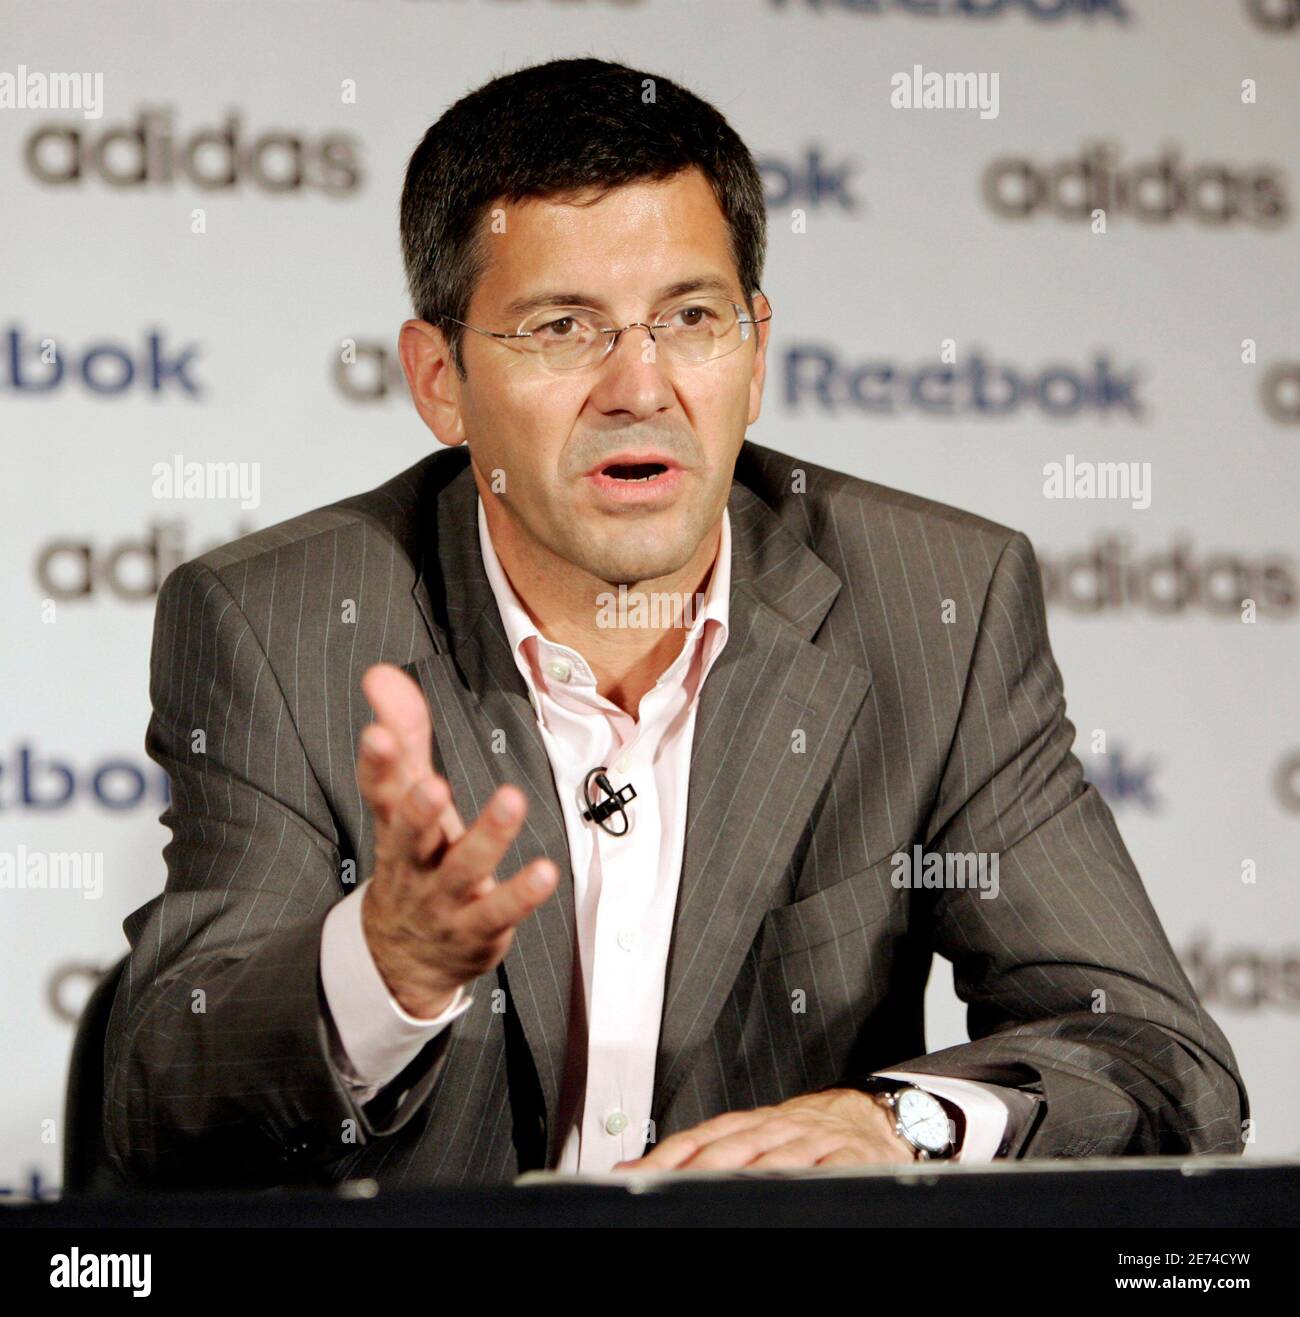 Adidas chief executive Hainer speaks during a news conference with Reebok  chief executive Fireman in Canton, Massachusetts. Herbert Hainer, chairman  and chief executive of Adidas-Salomon, speaks during a news conference with  Paul